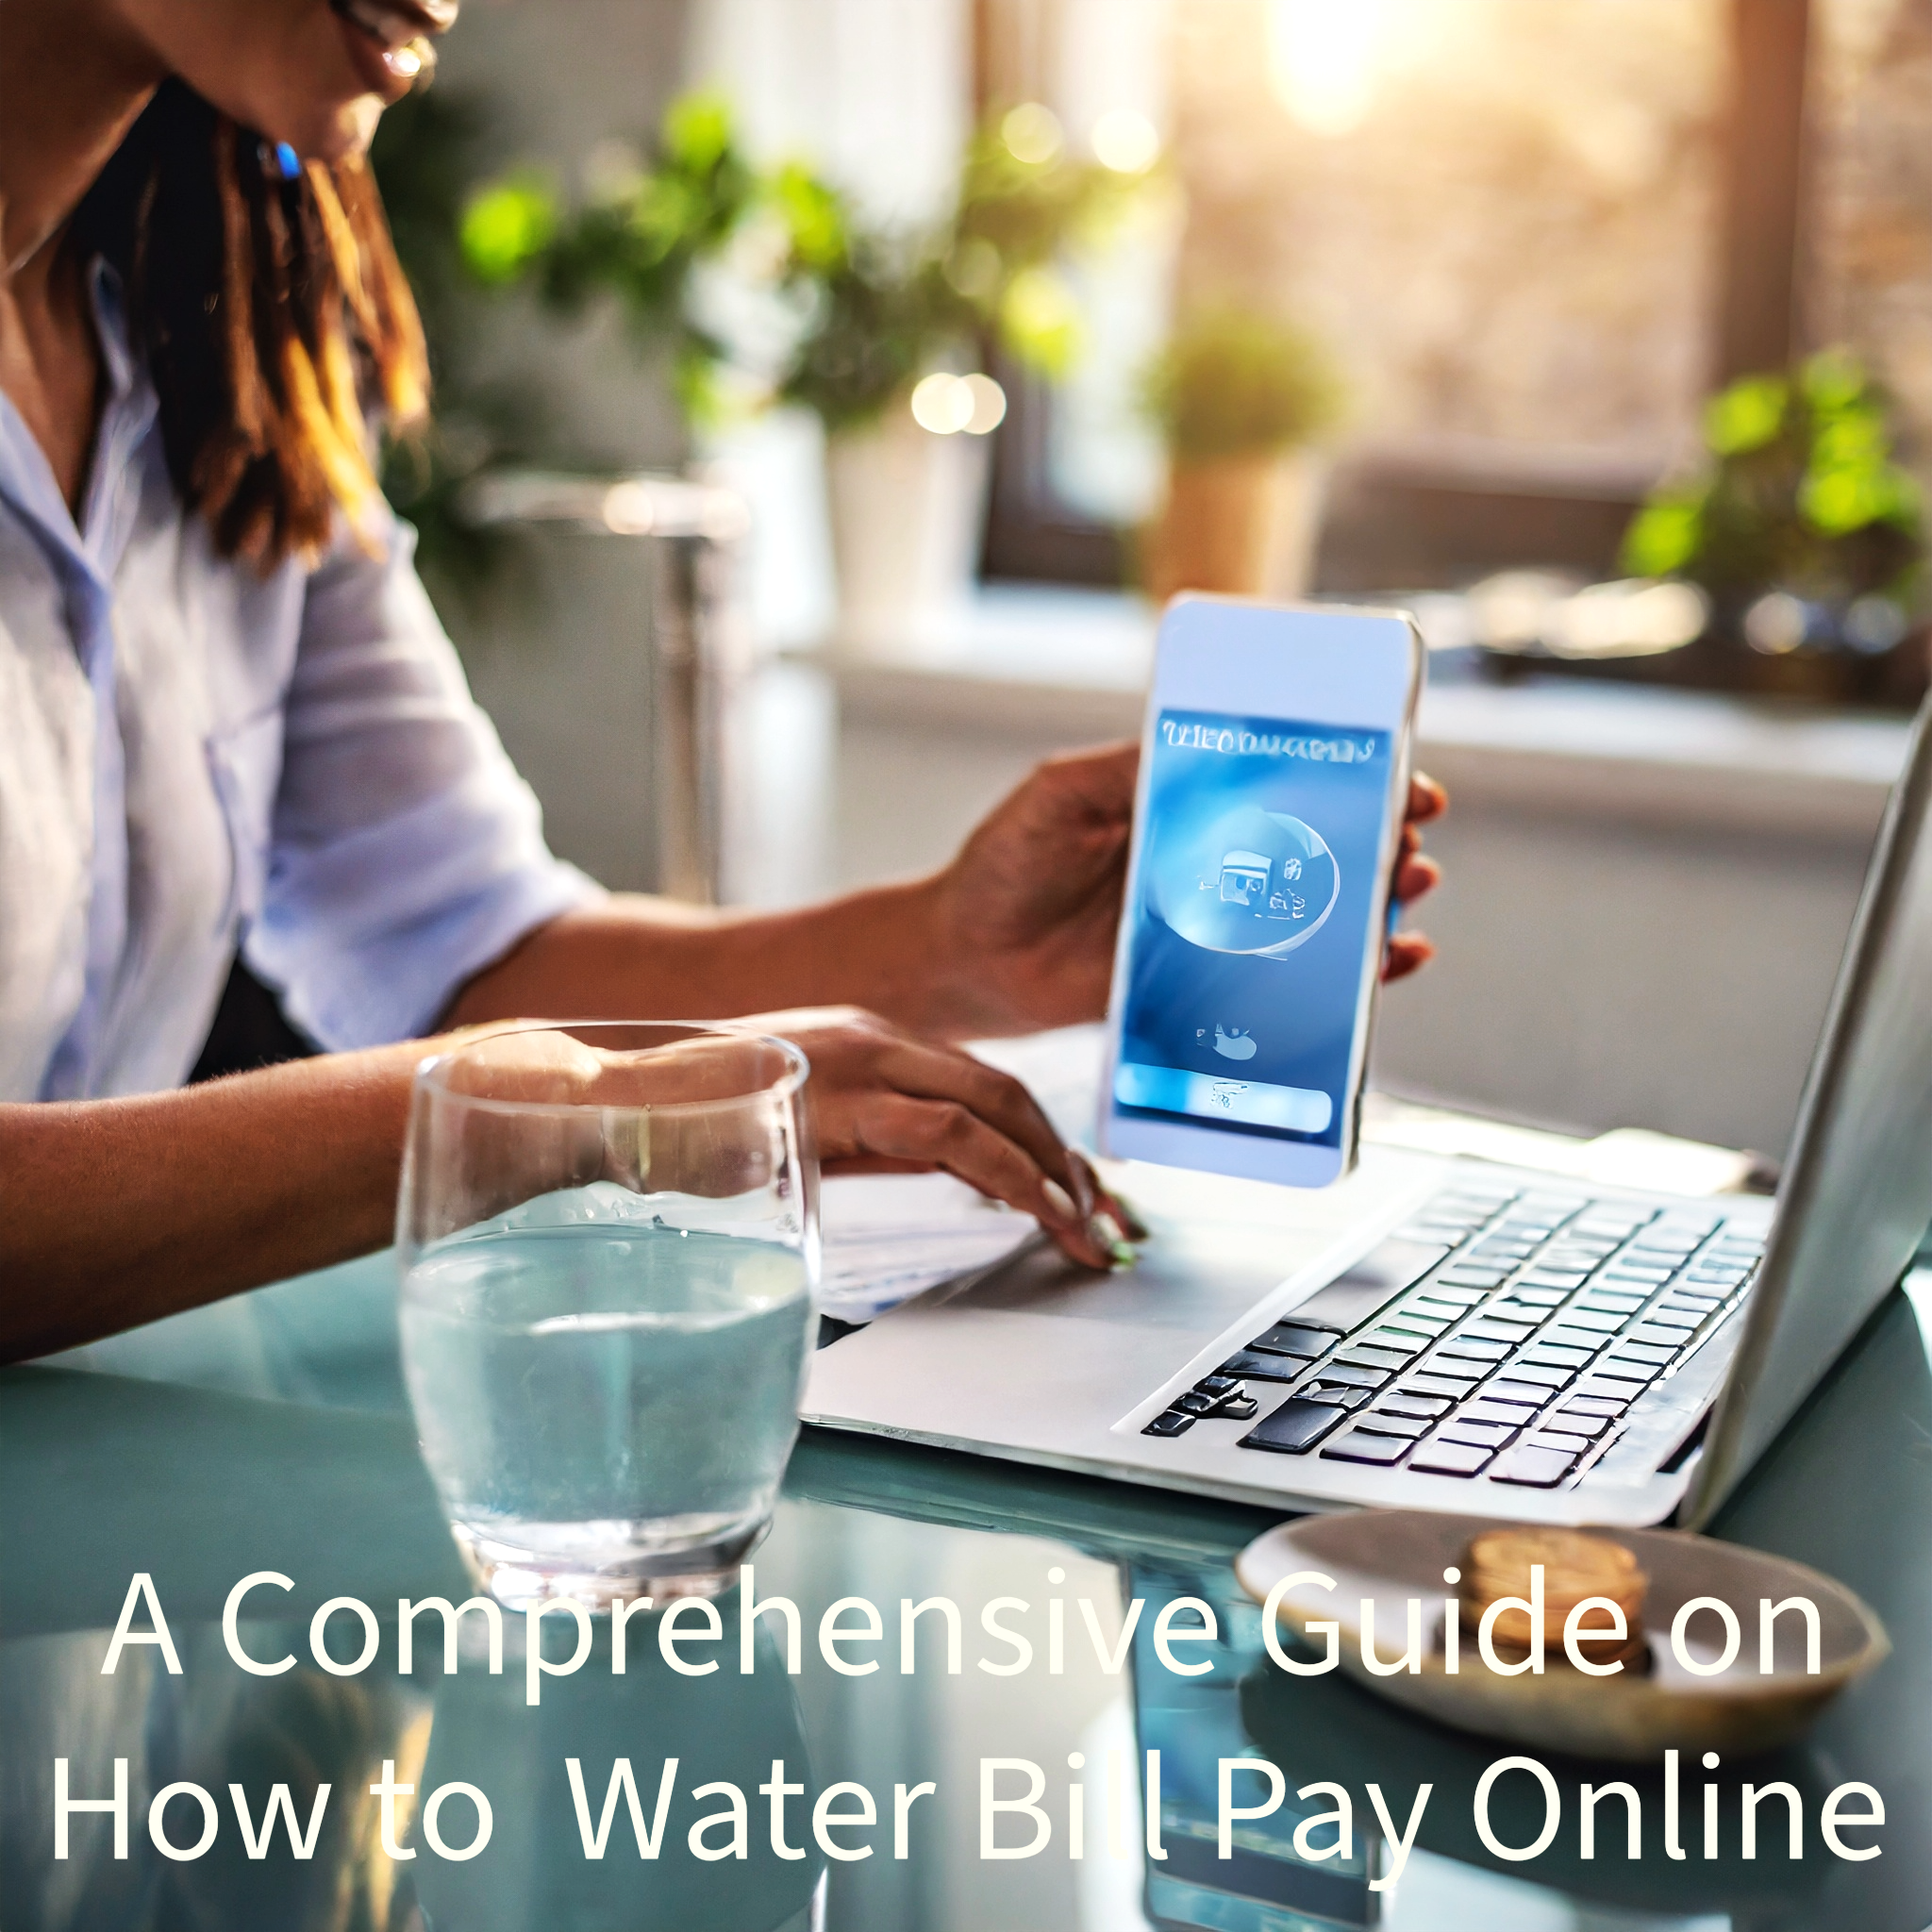 A Comprehensive Guide on How to  Water Bill Pay Online